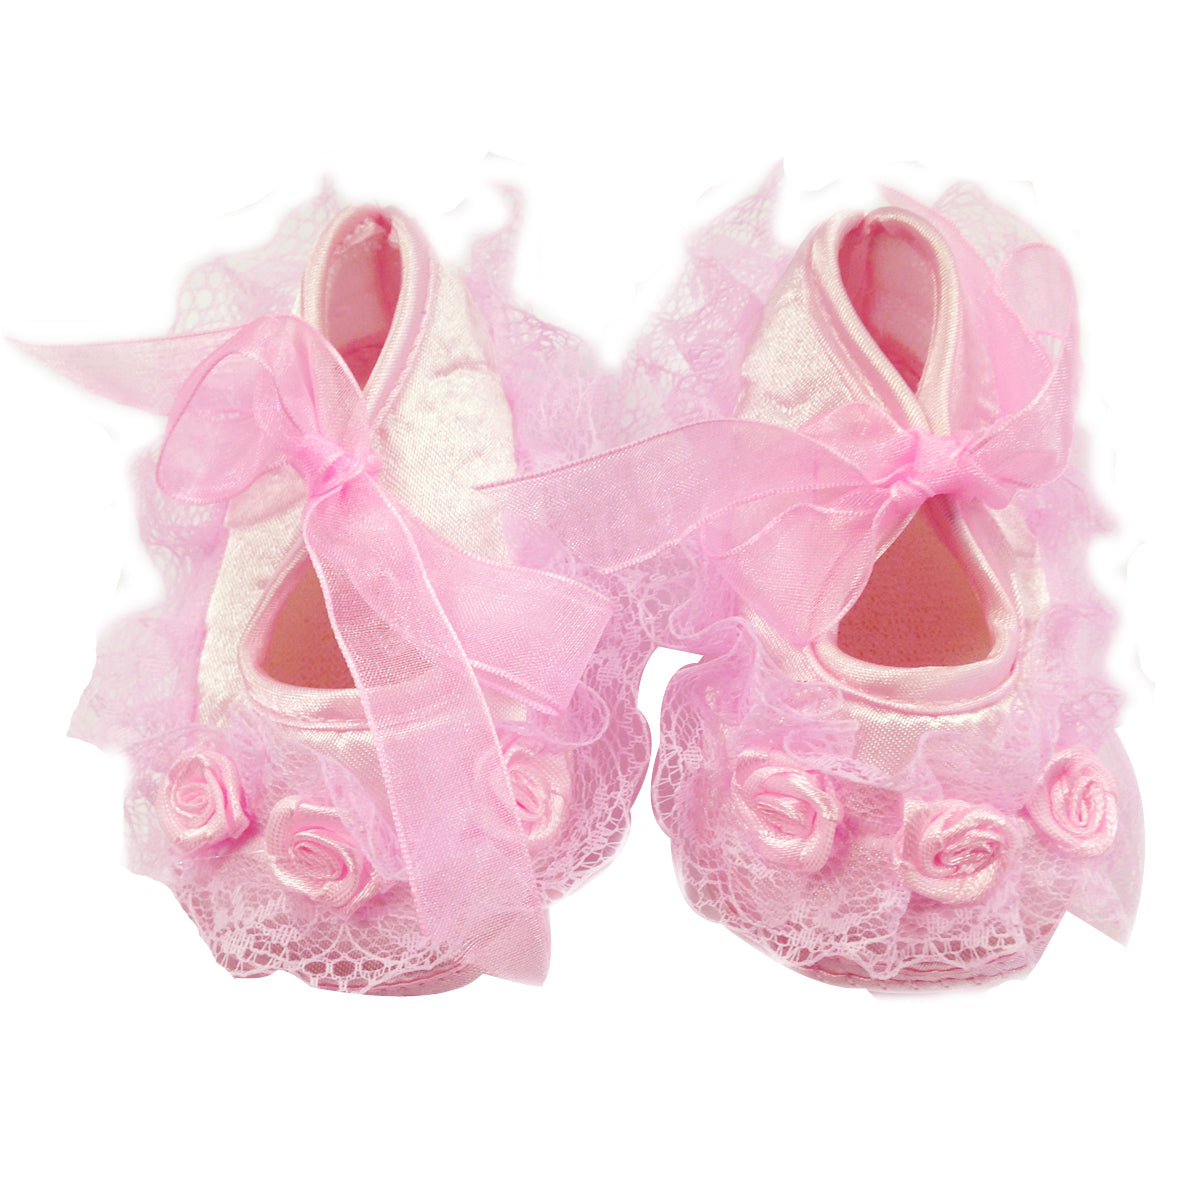 Wrapables Floral and Lace Princess Shoes and Headband Set